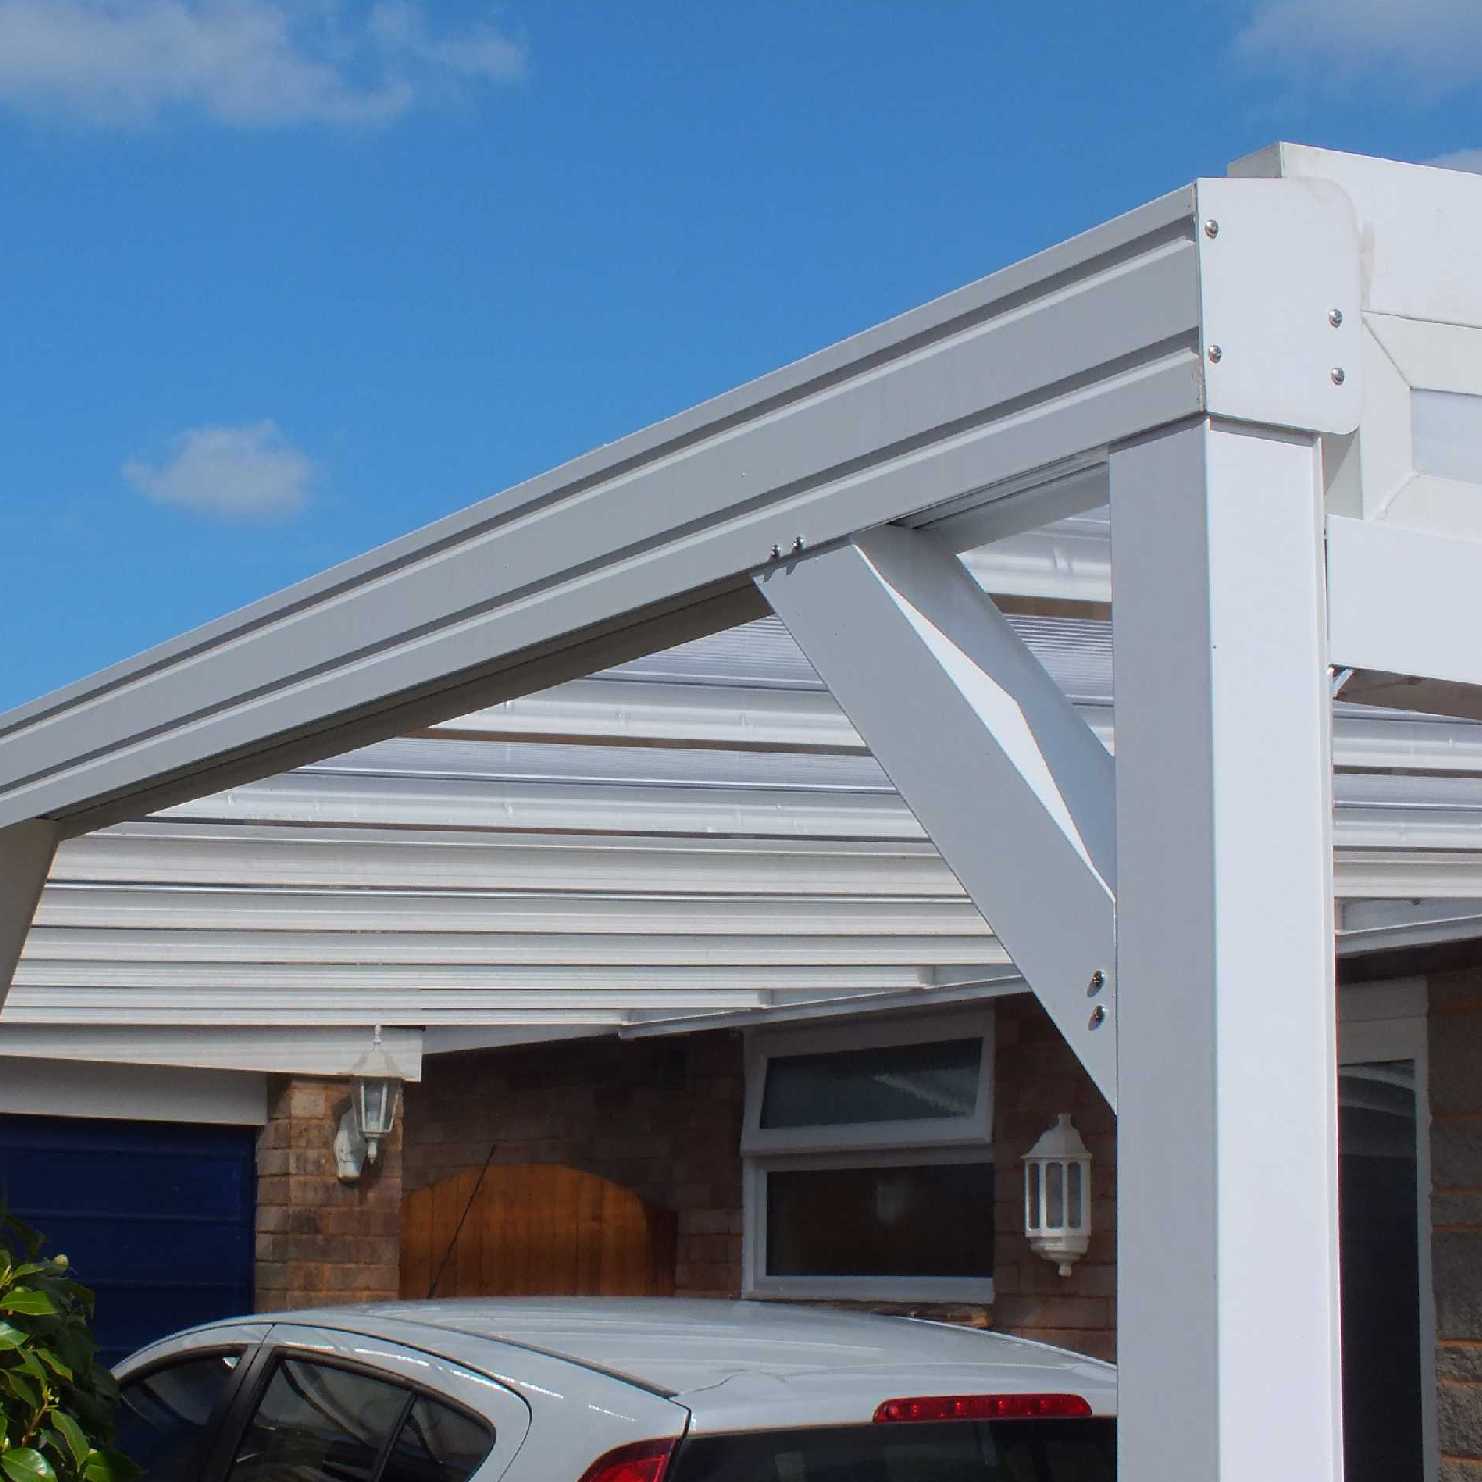 Buy Omega Smart Lean-To Canopy, White with 16mm Polycarbonate Glazing - 3.1m (W) x 1.5m (P), (2) Supporting Posts online today